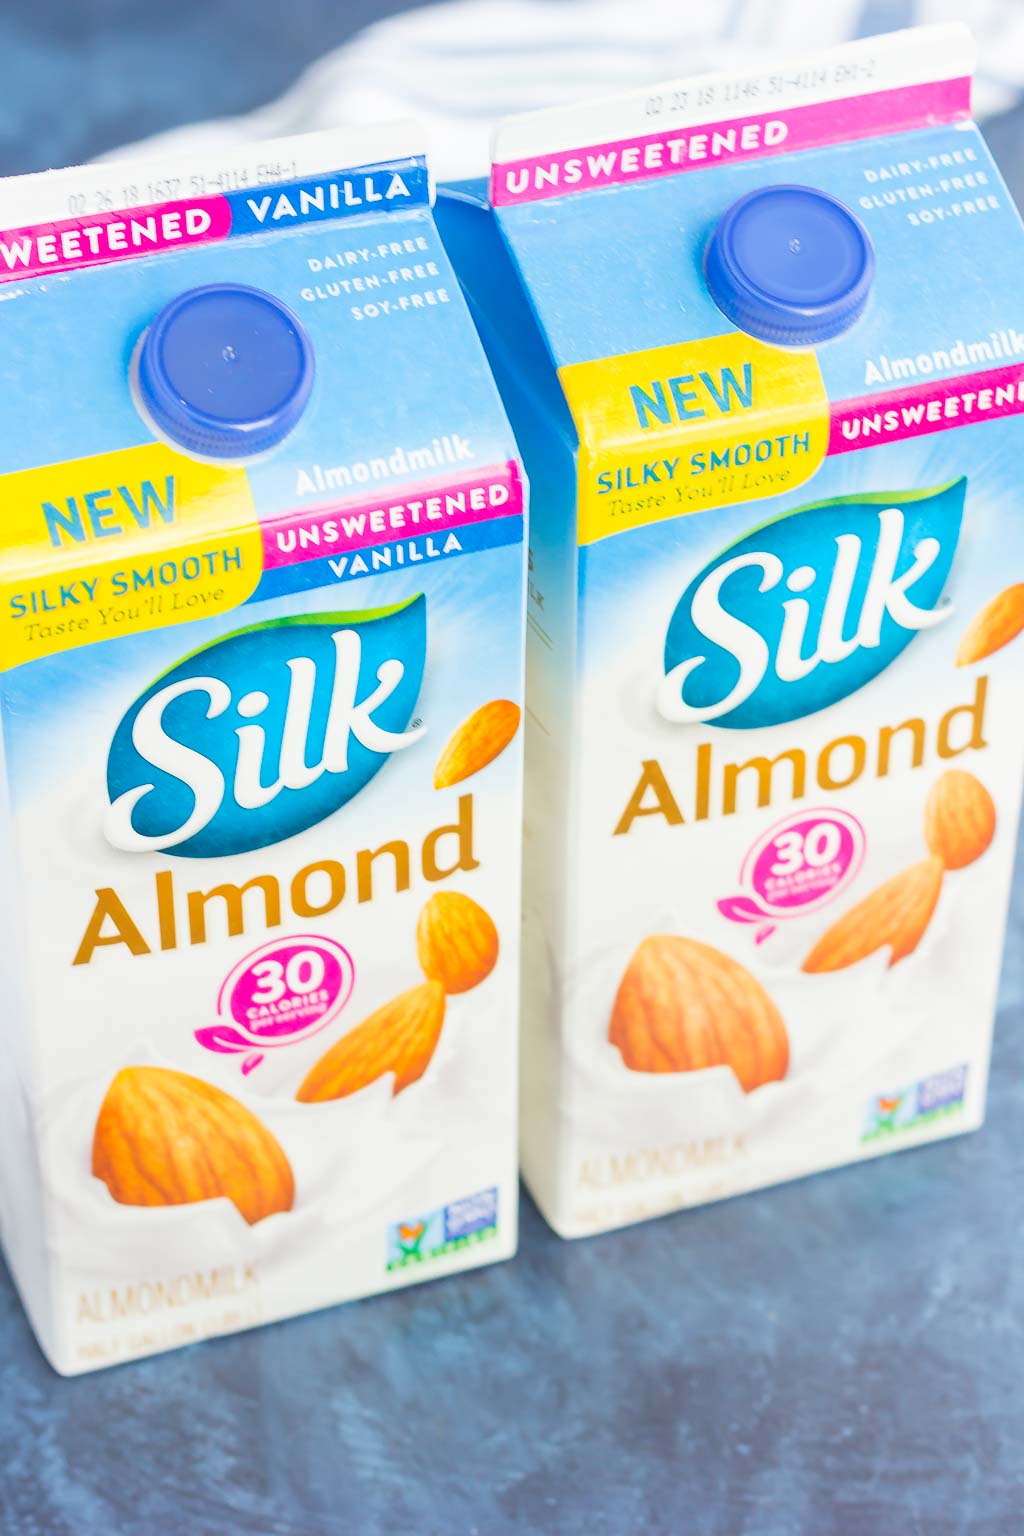 Two cartons of Silk almond milk, side by side. 